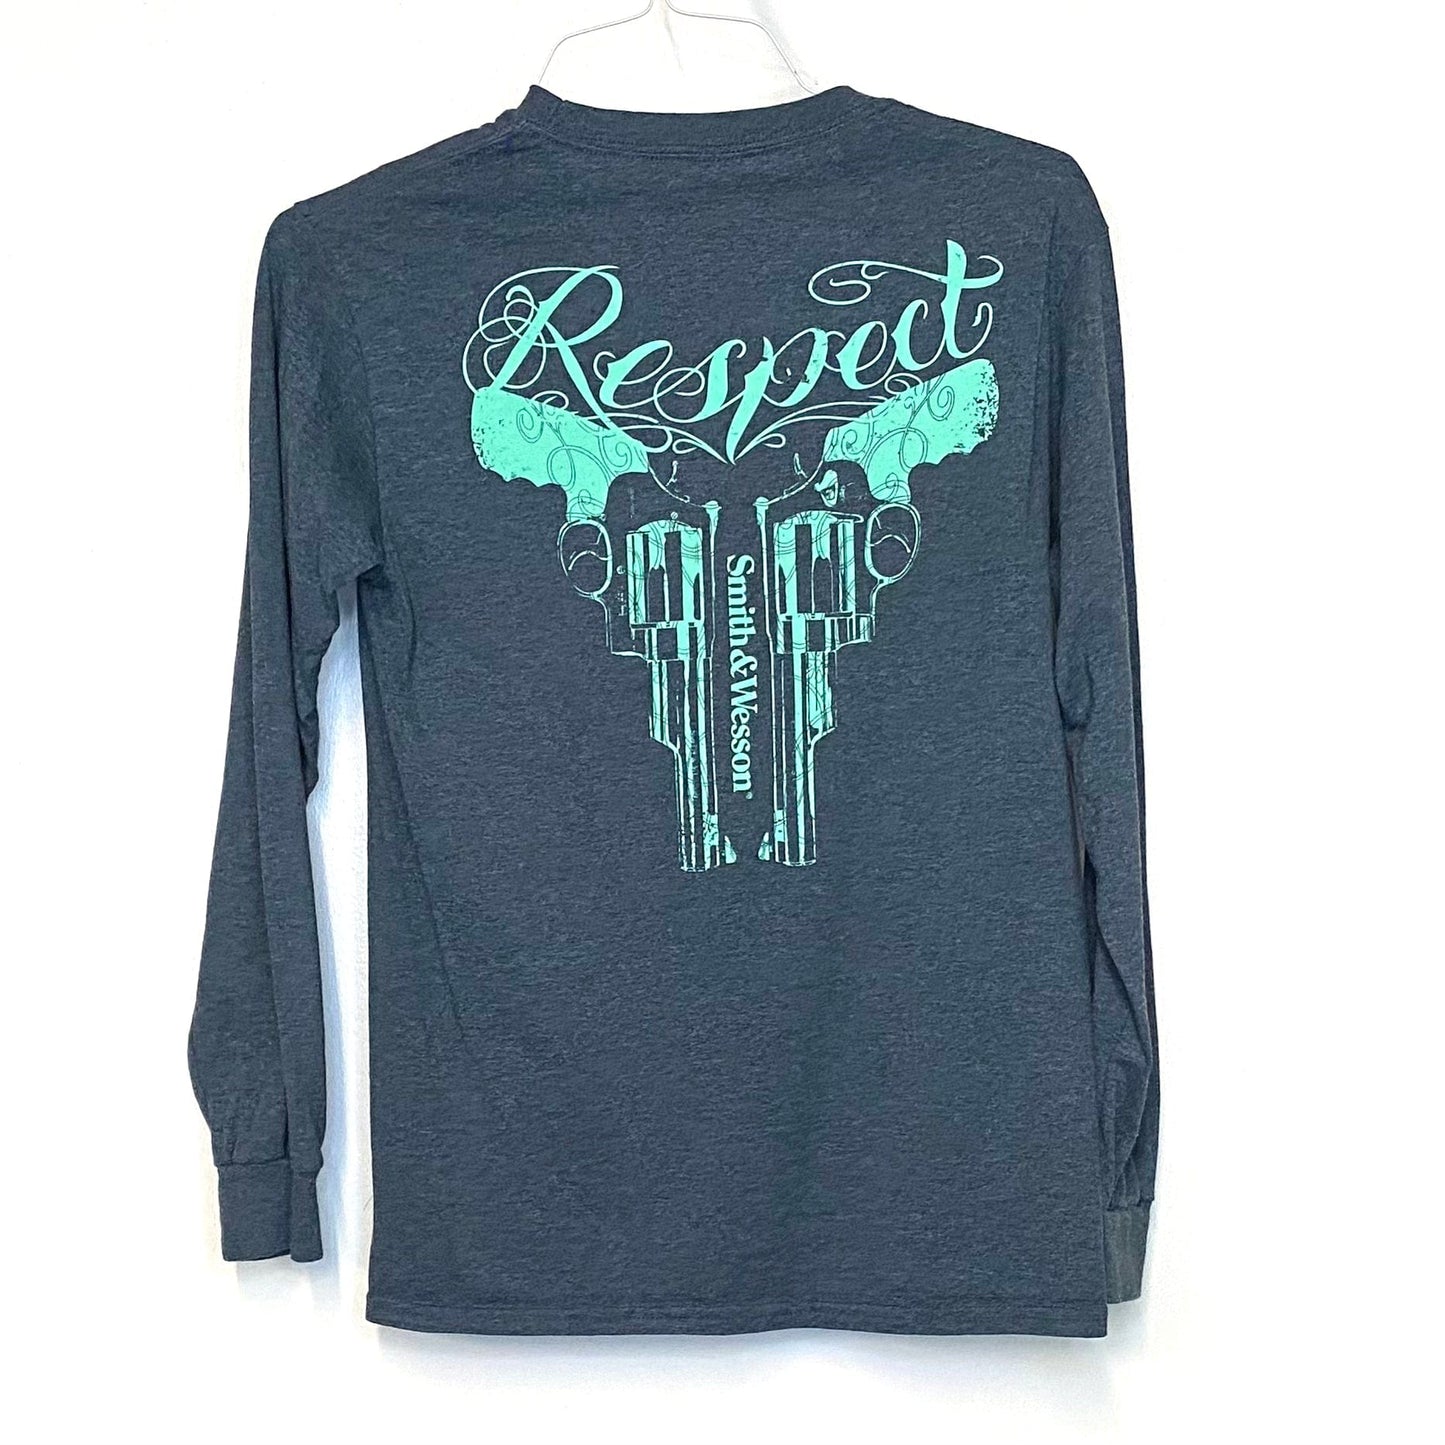 Smith & Wesson Womens Size S Gray Graphic T-Shirt “Respect” L/s